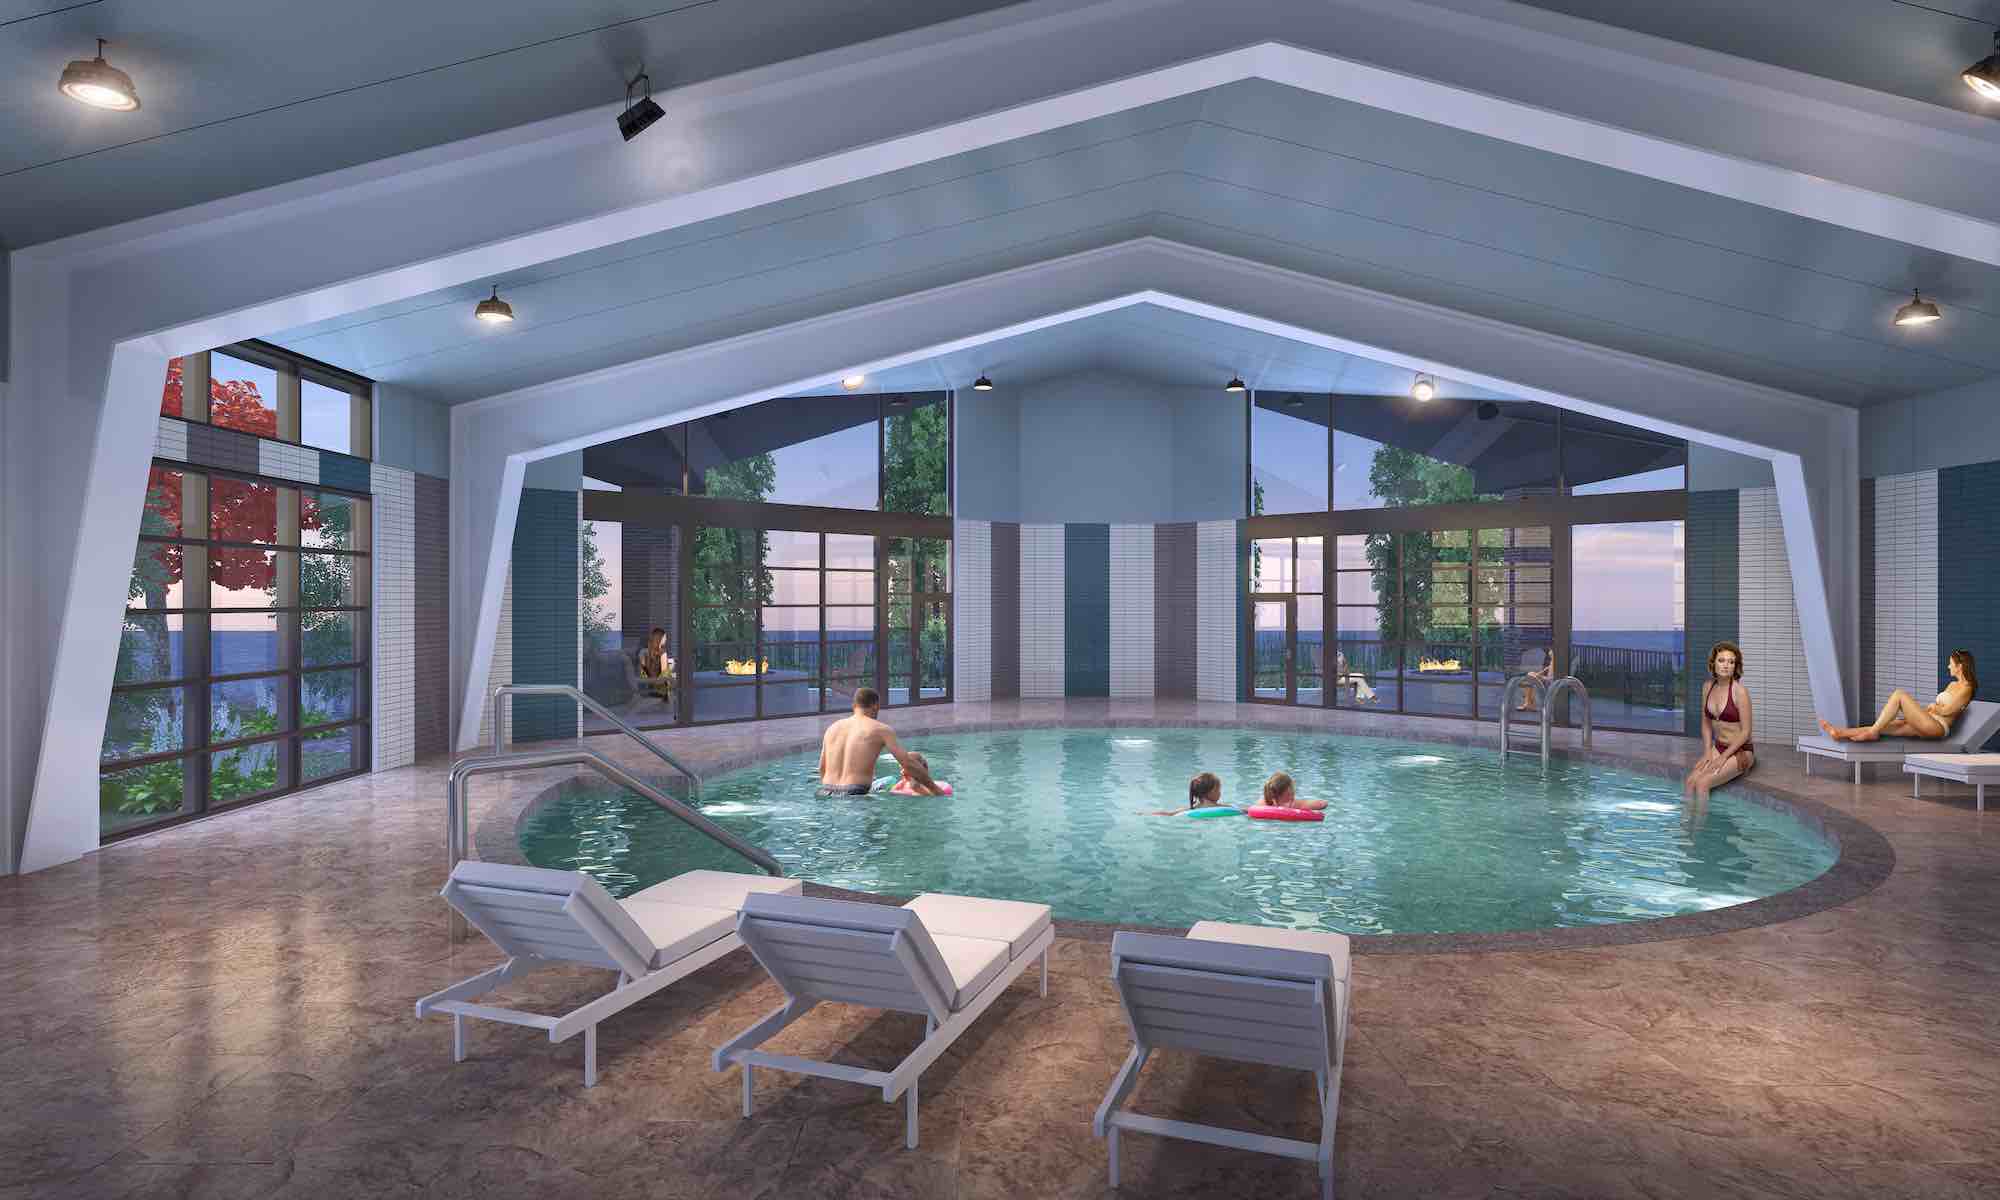 Sharonville Hotel Expands with Indoor Pool Facility ...
